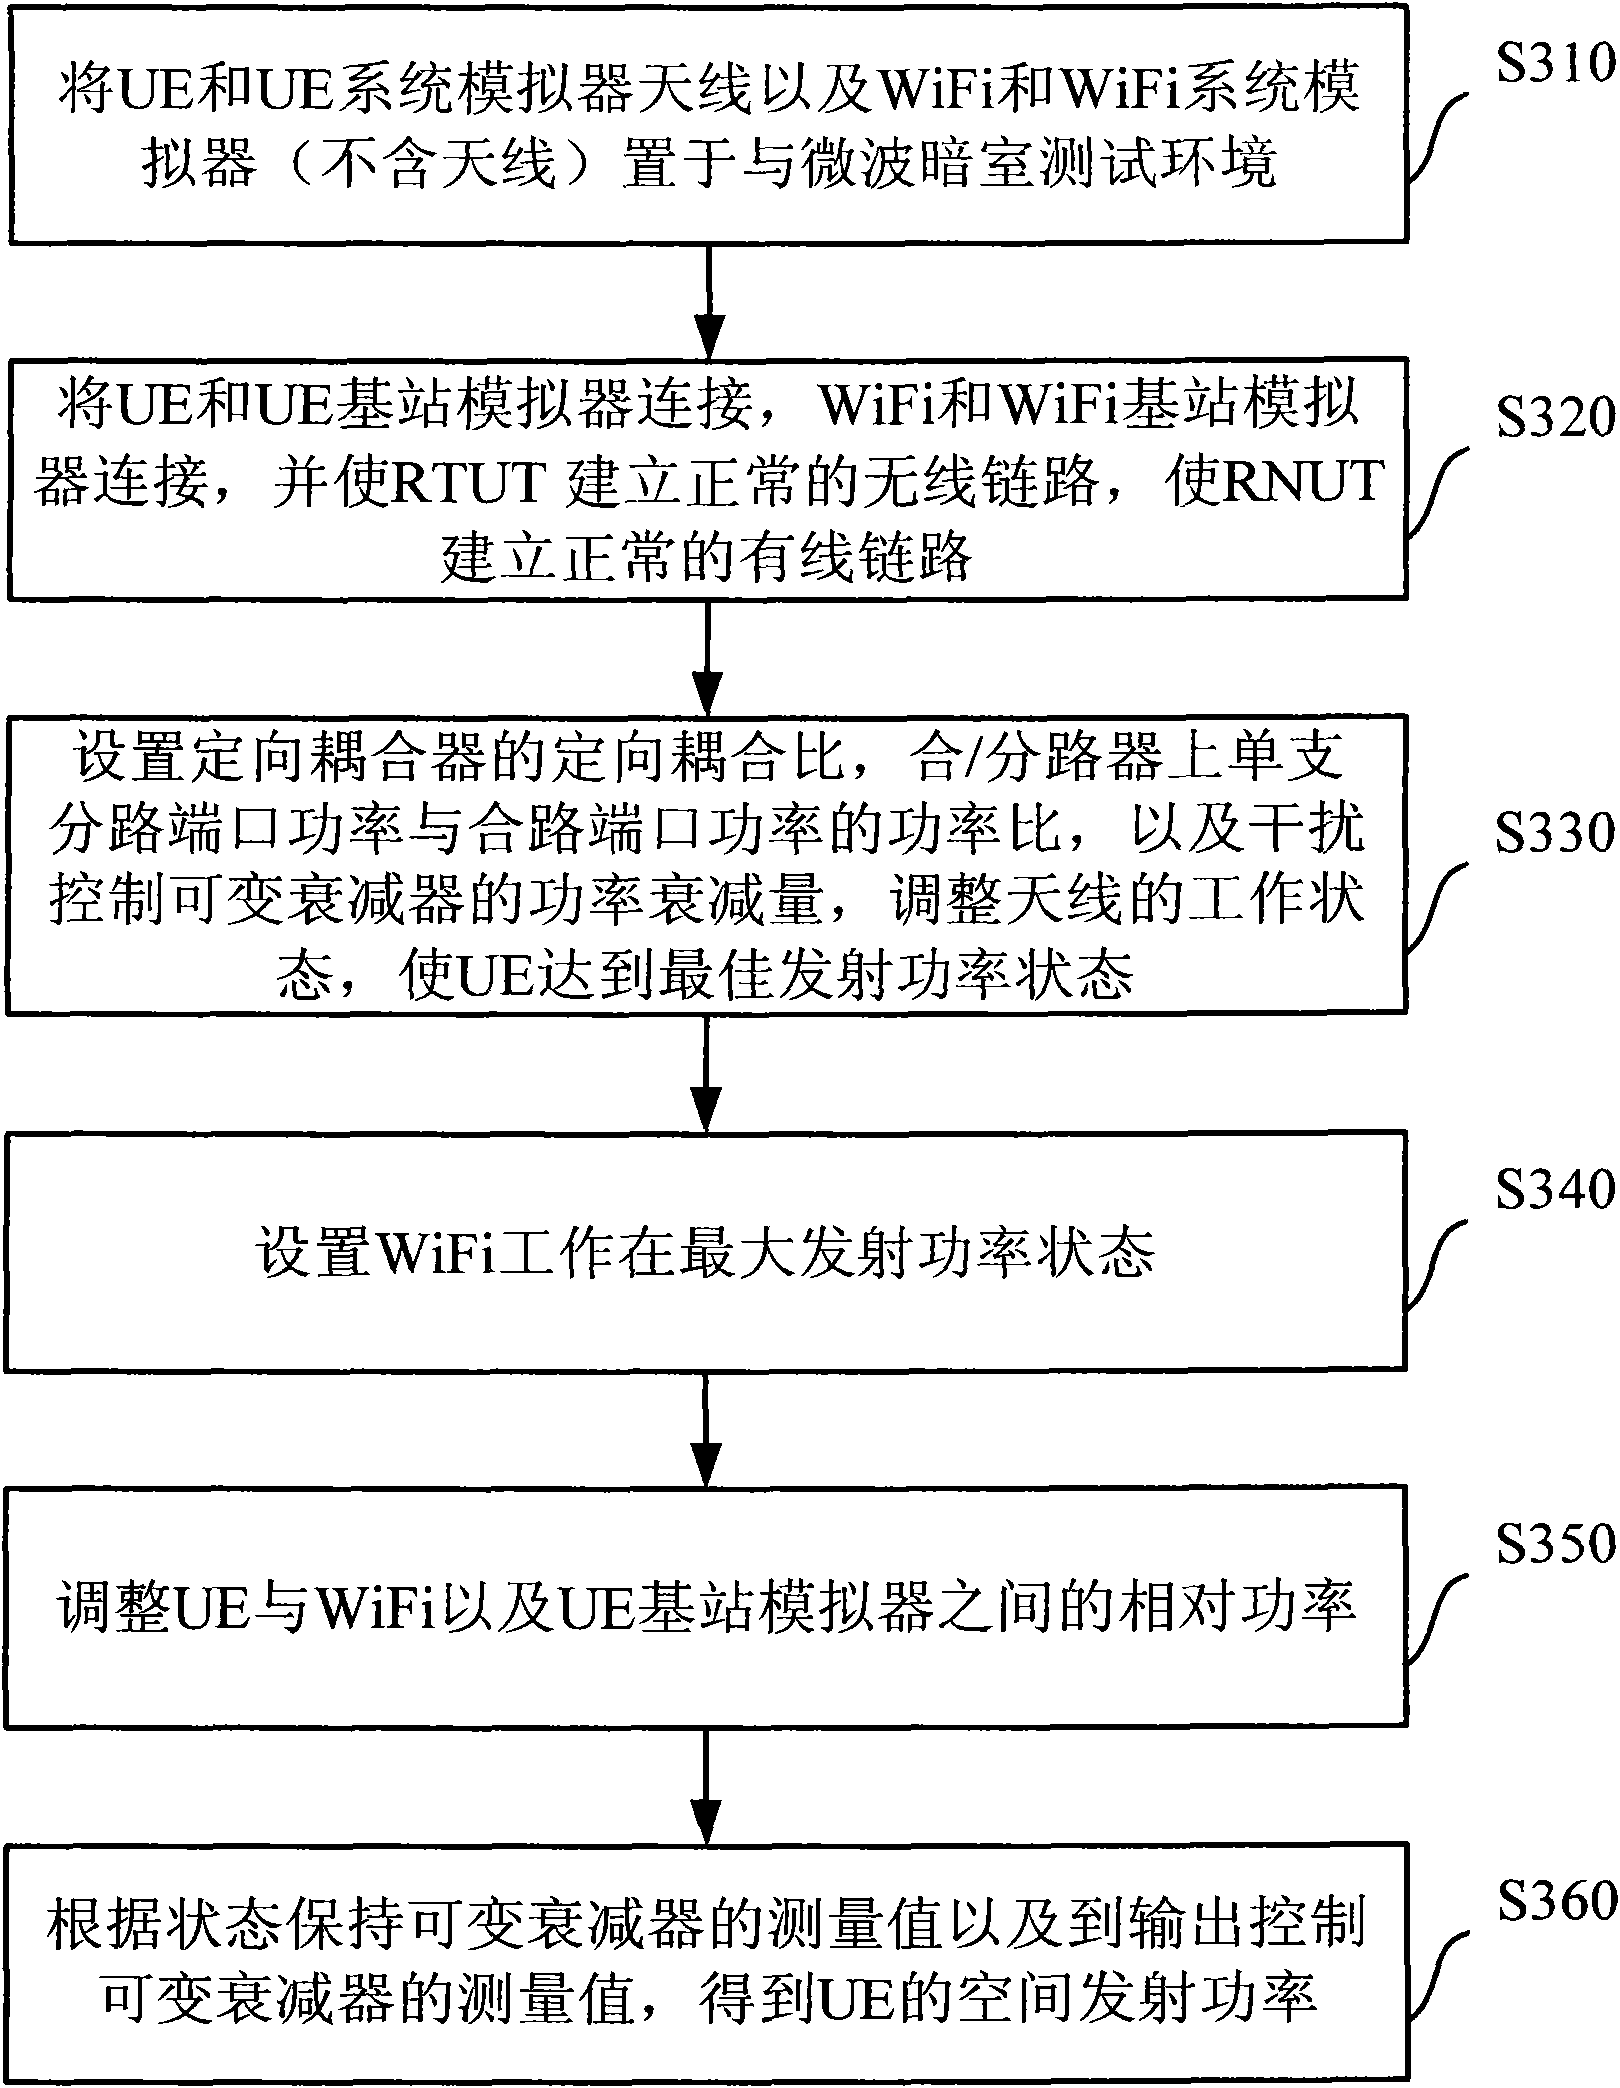 Measuring method for space transmission power of receiving terminal under test in multi-access terminal